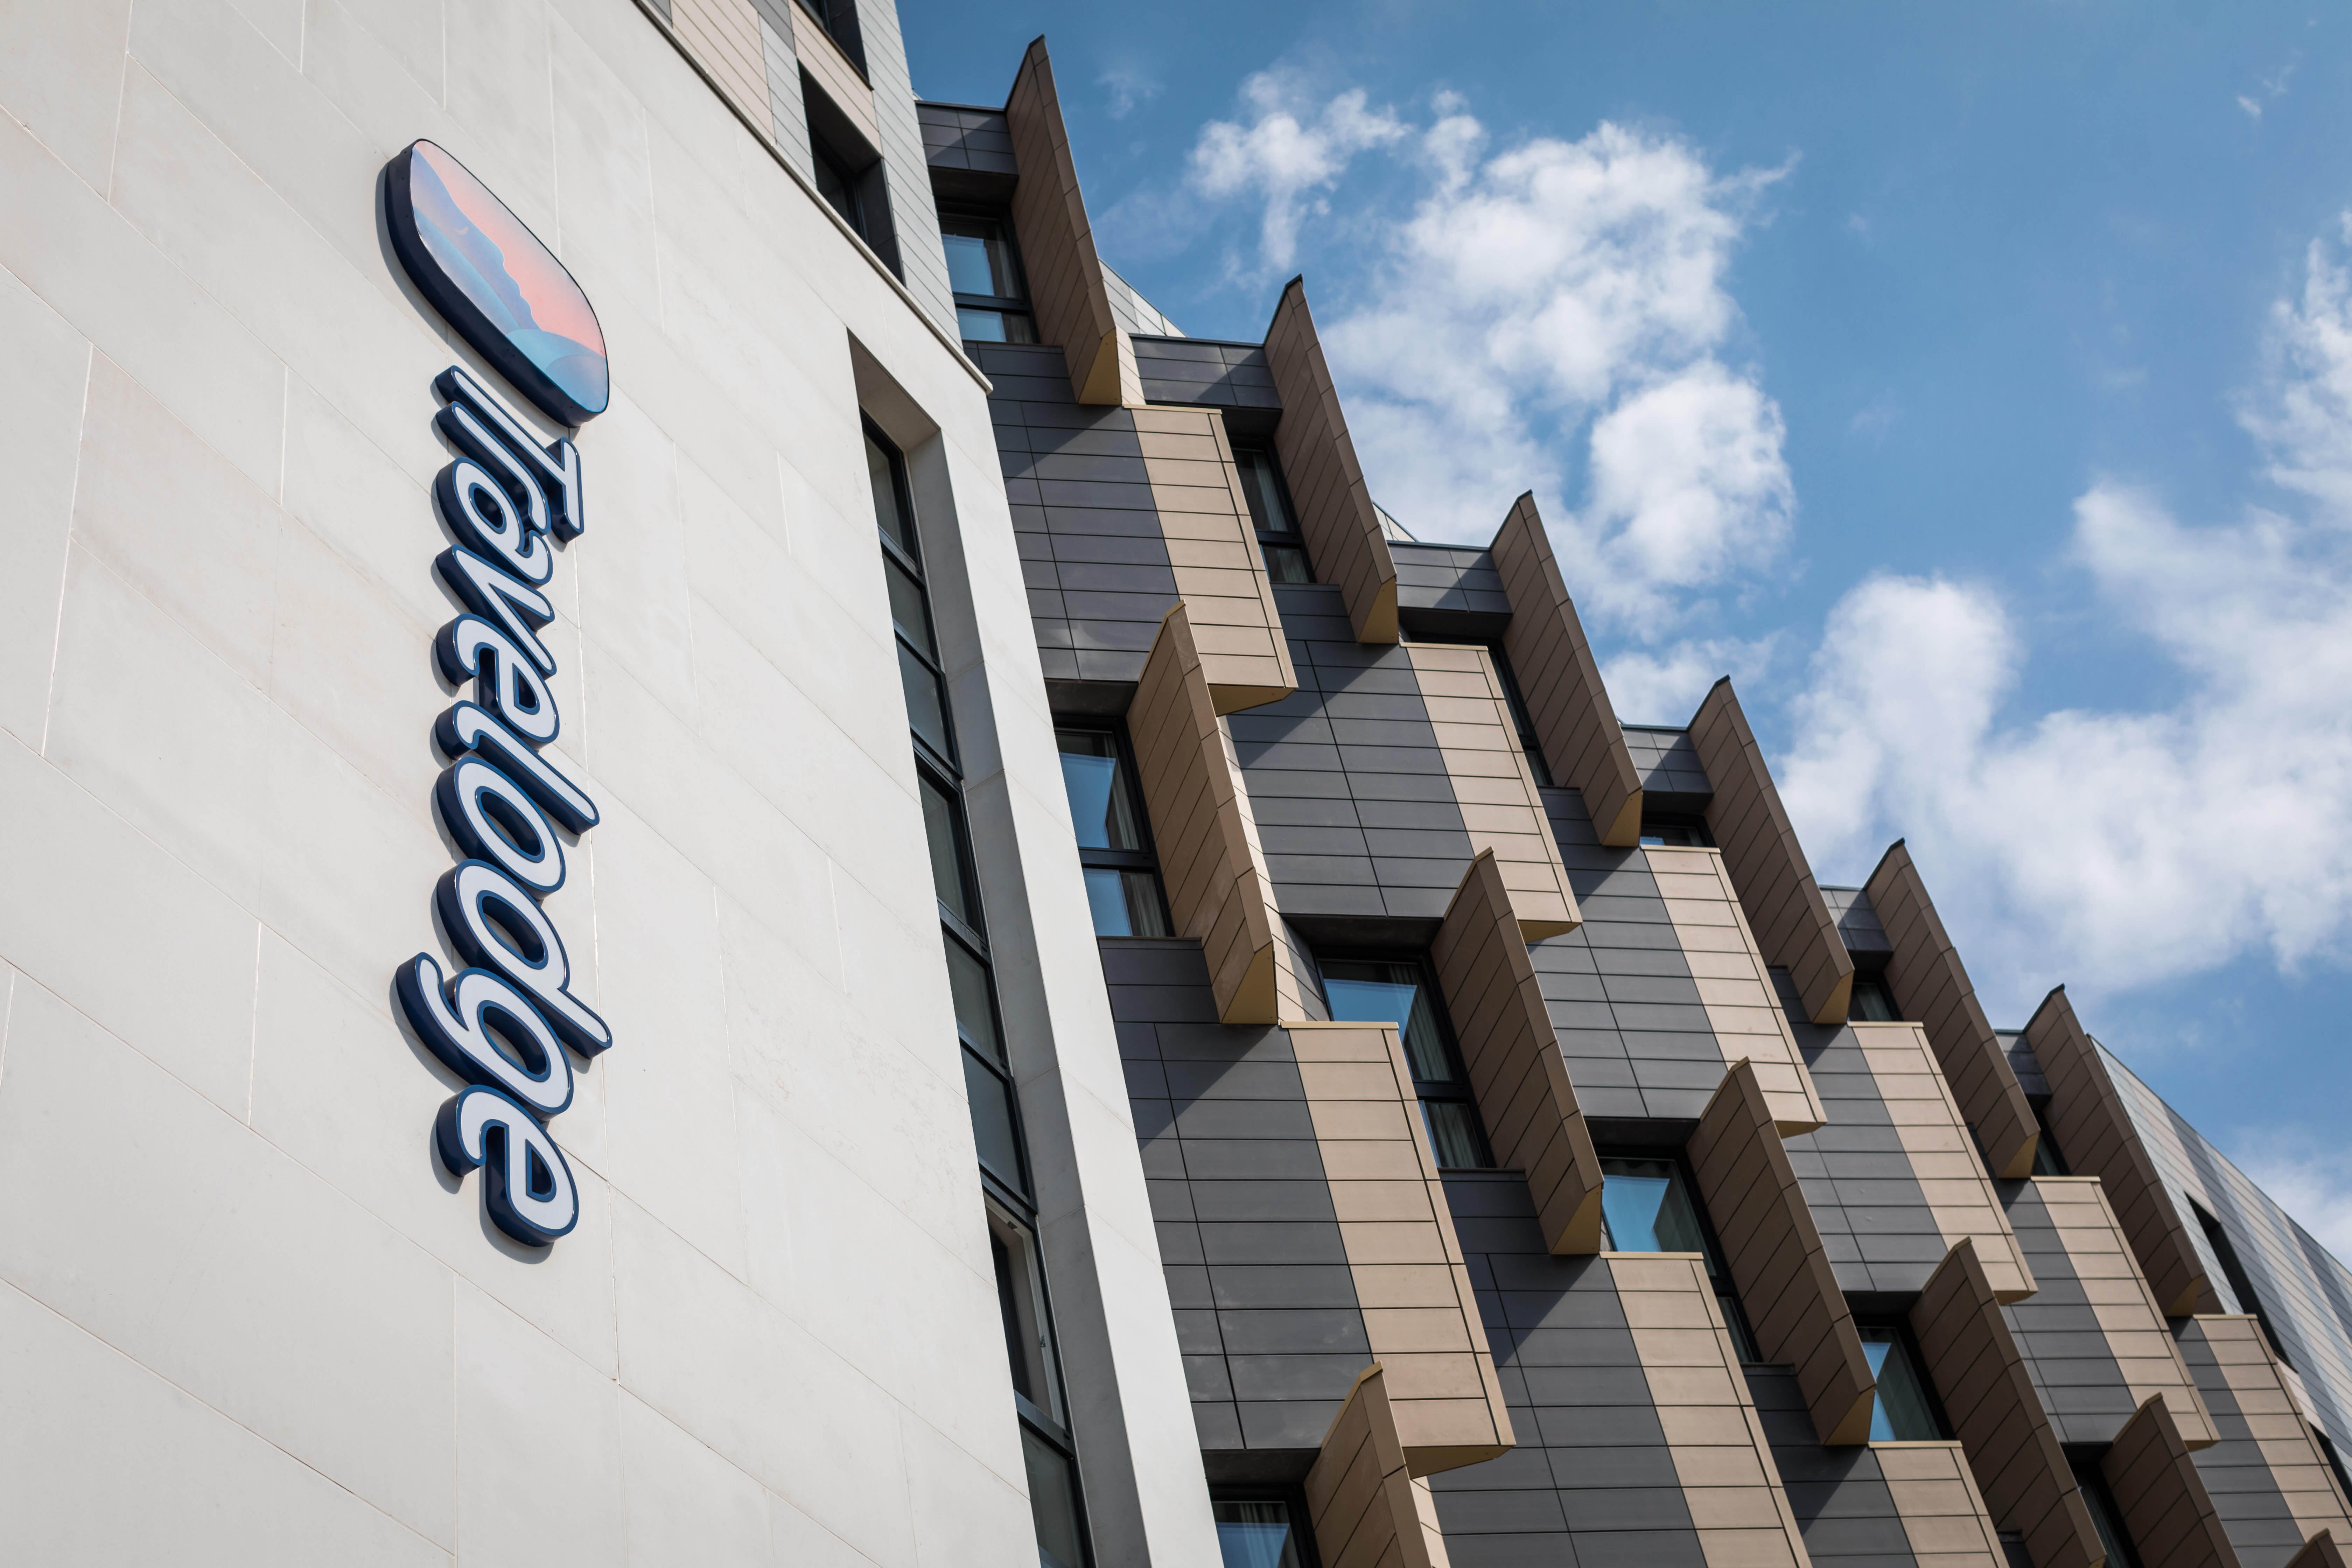 Travelodge partners with Disability Positive 